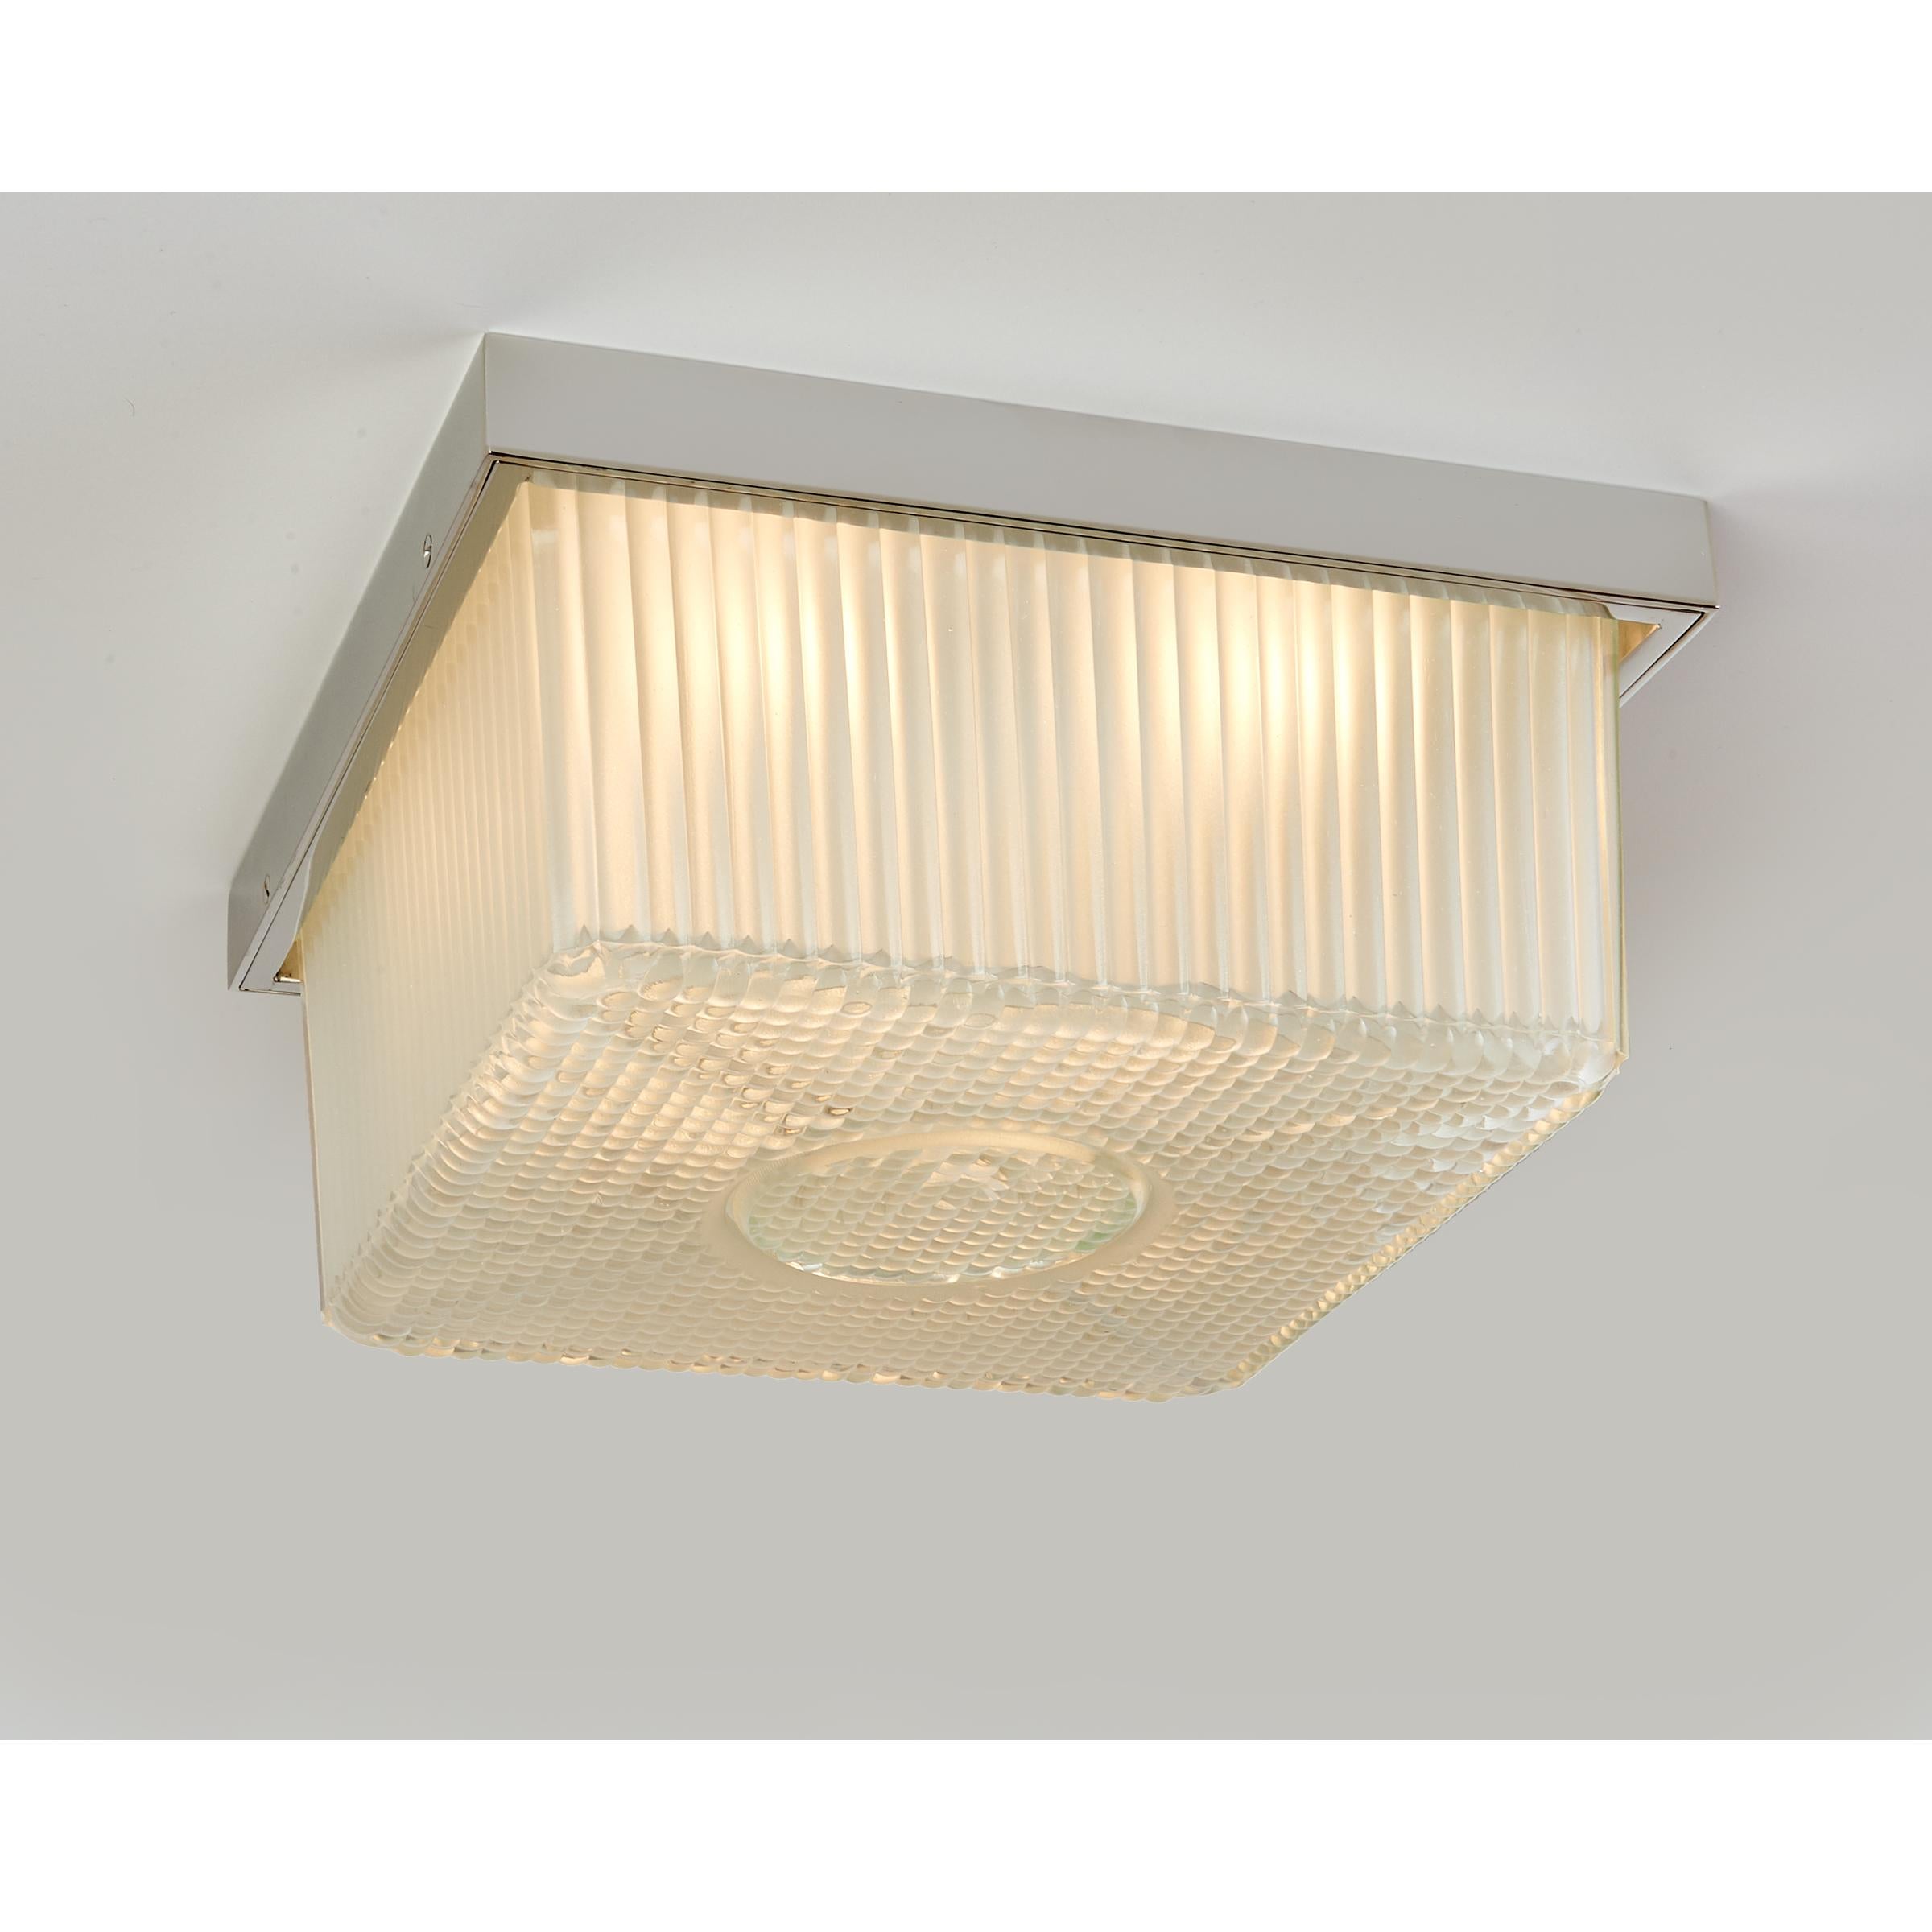 France, 1950s
A square ceiling light in rich ribbed and textured frosted cast glass, 
with ingenious removable center hole opening. Nickeled metal frame.
Measures: 11 W x 11 D x 6 H 
Rewired for use in the US with four candelabra base bulbs.